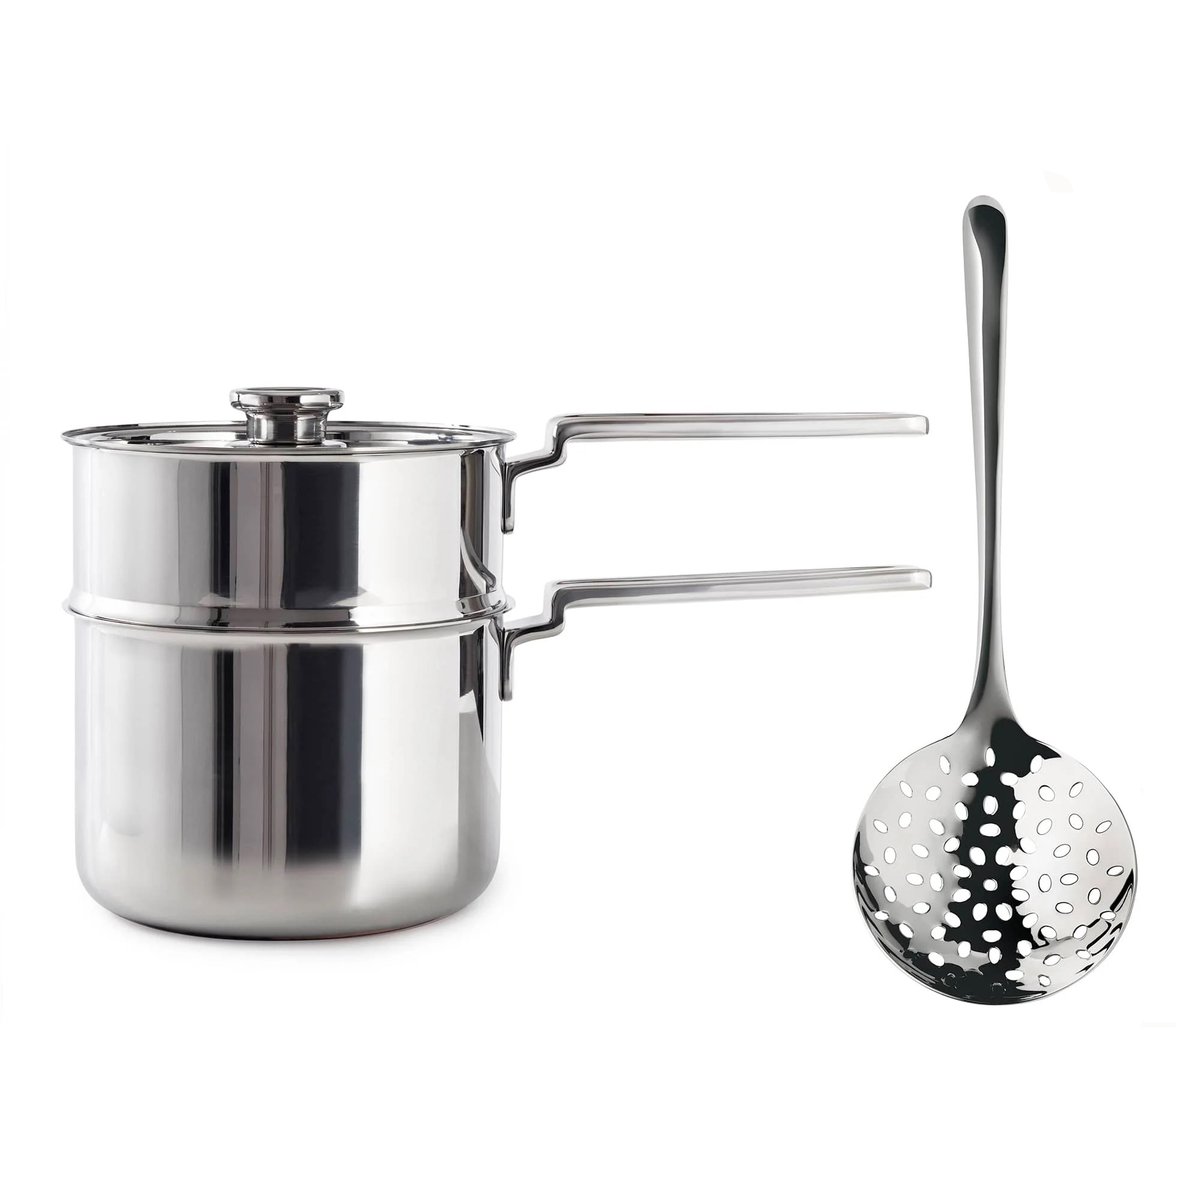 Here is my latest blog post which is a review of my #RobertWelch 3.2 litre saucepan and steamer set. If you like having great equipment in your kitchen then take a look. #chefkevinashton #saucepanreview #chefreview click on link chefkevinashton.com/2024/05/04/cam…